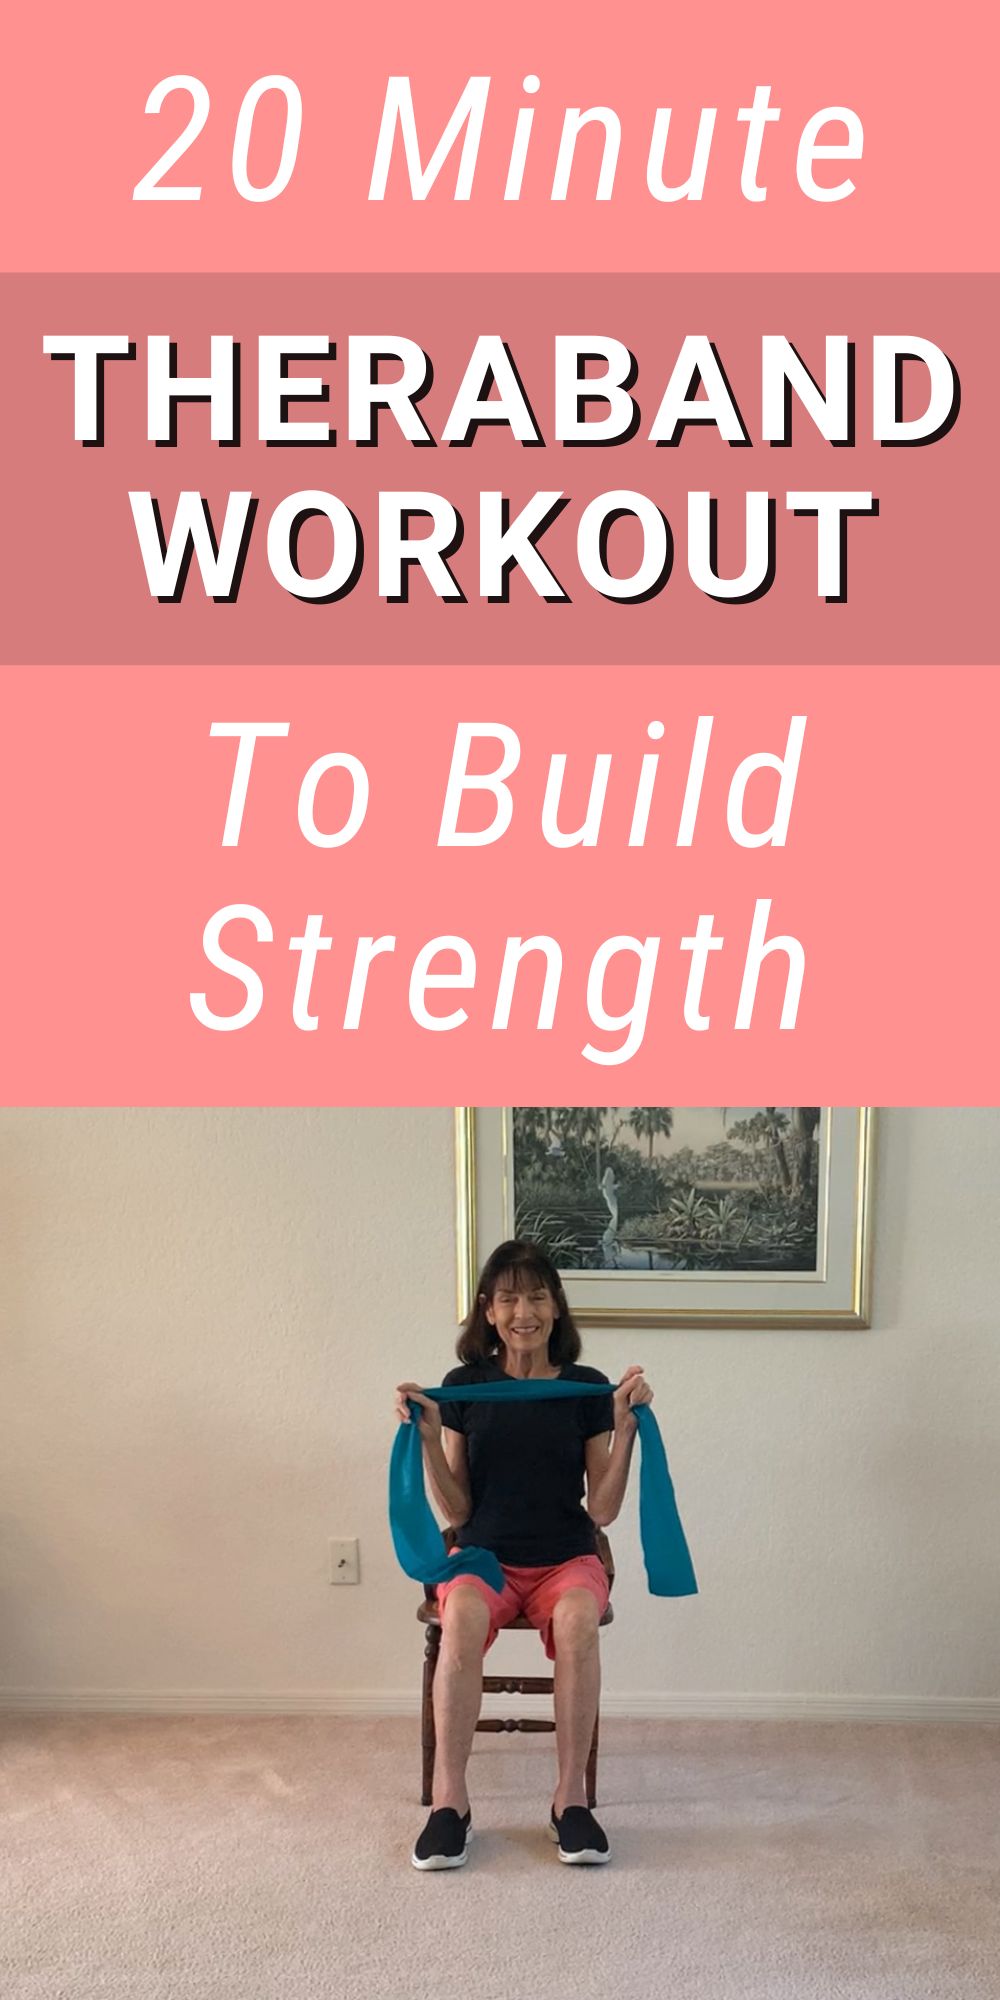 theraband workout to build strength